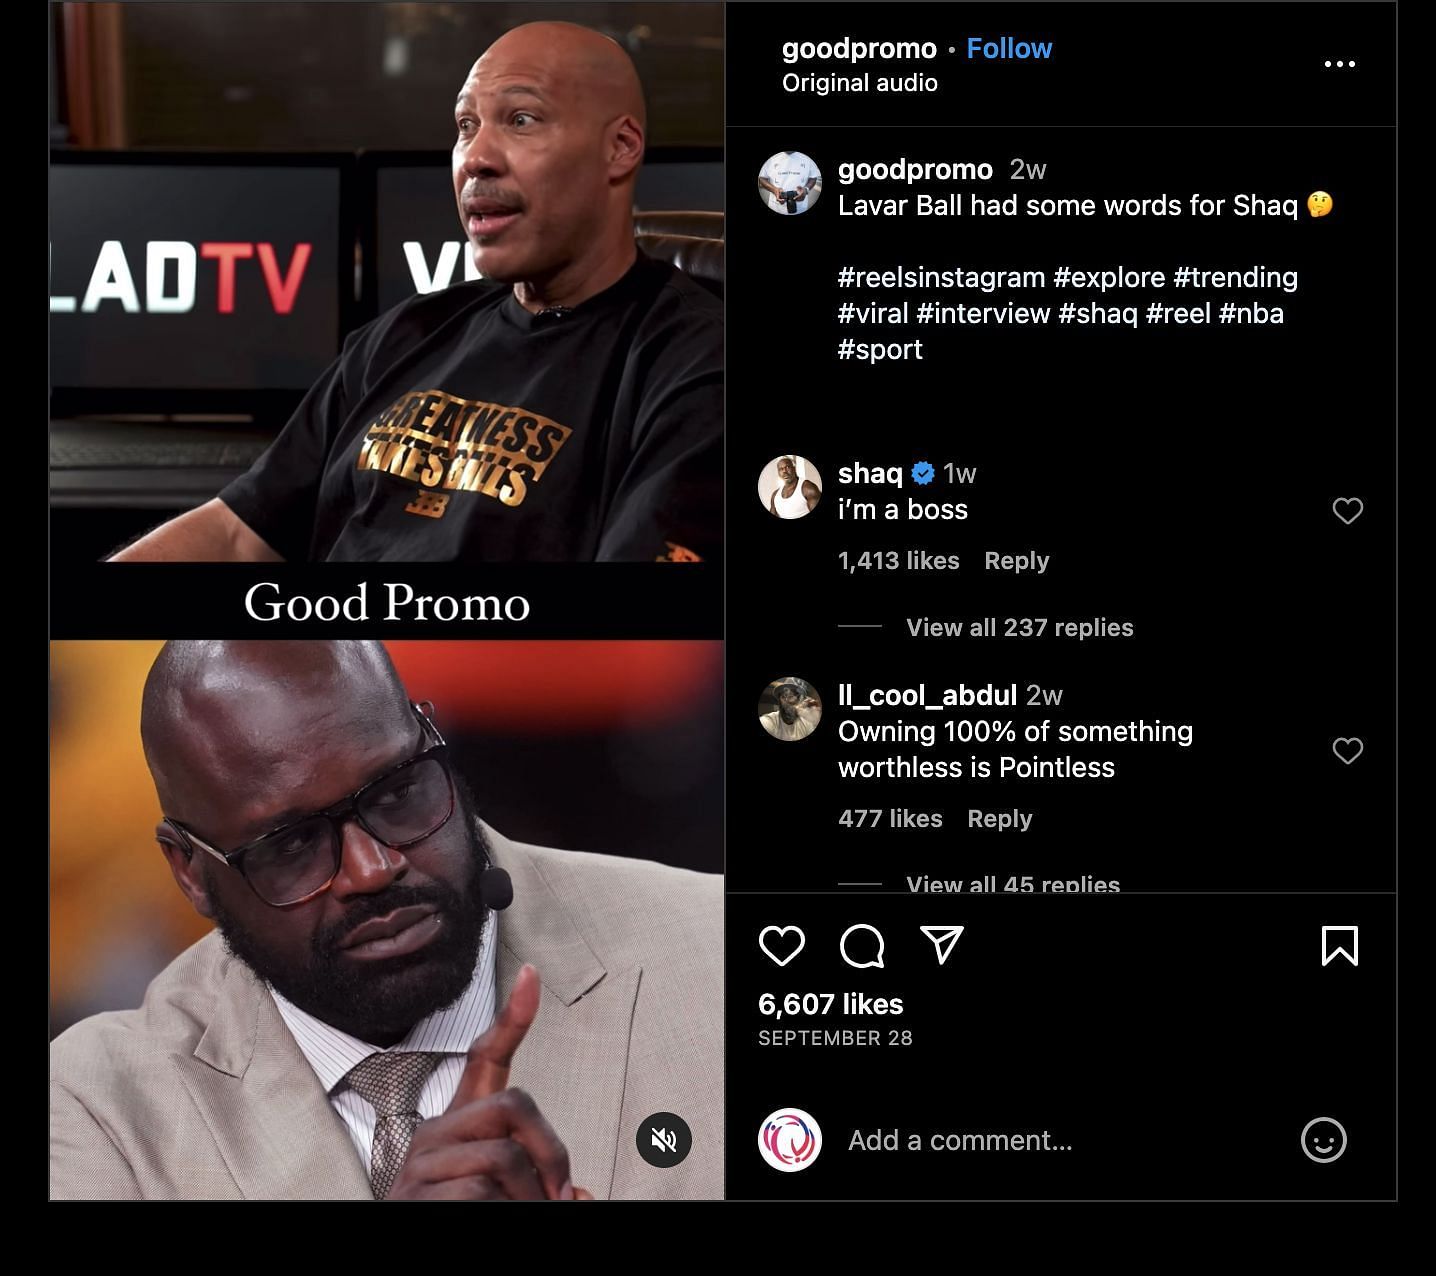 Shaq retorted in the comments.